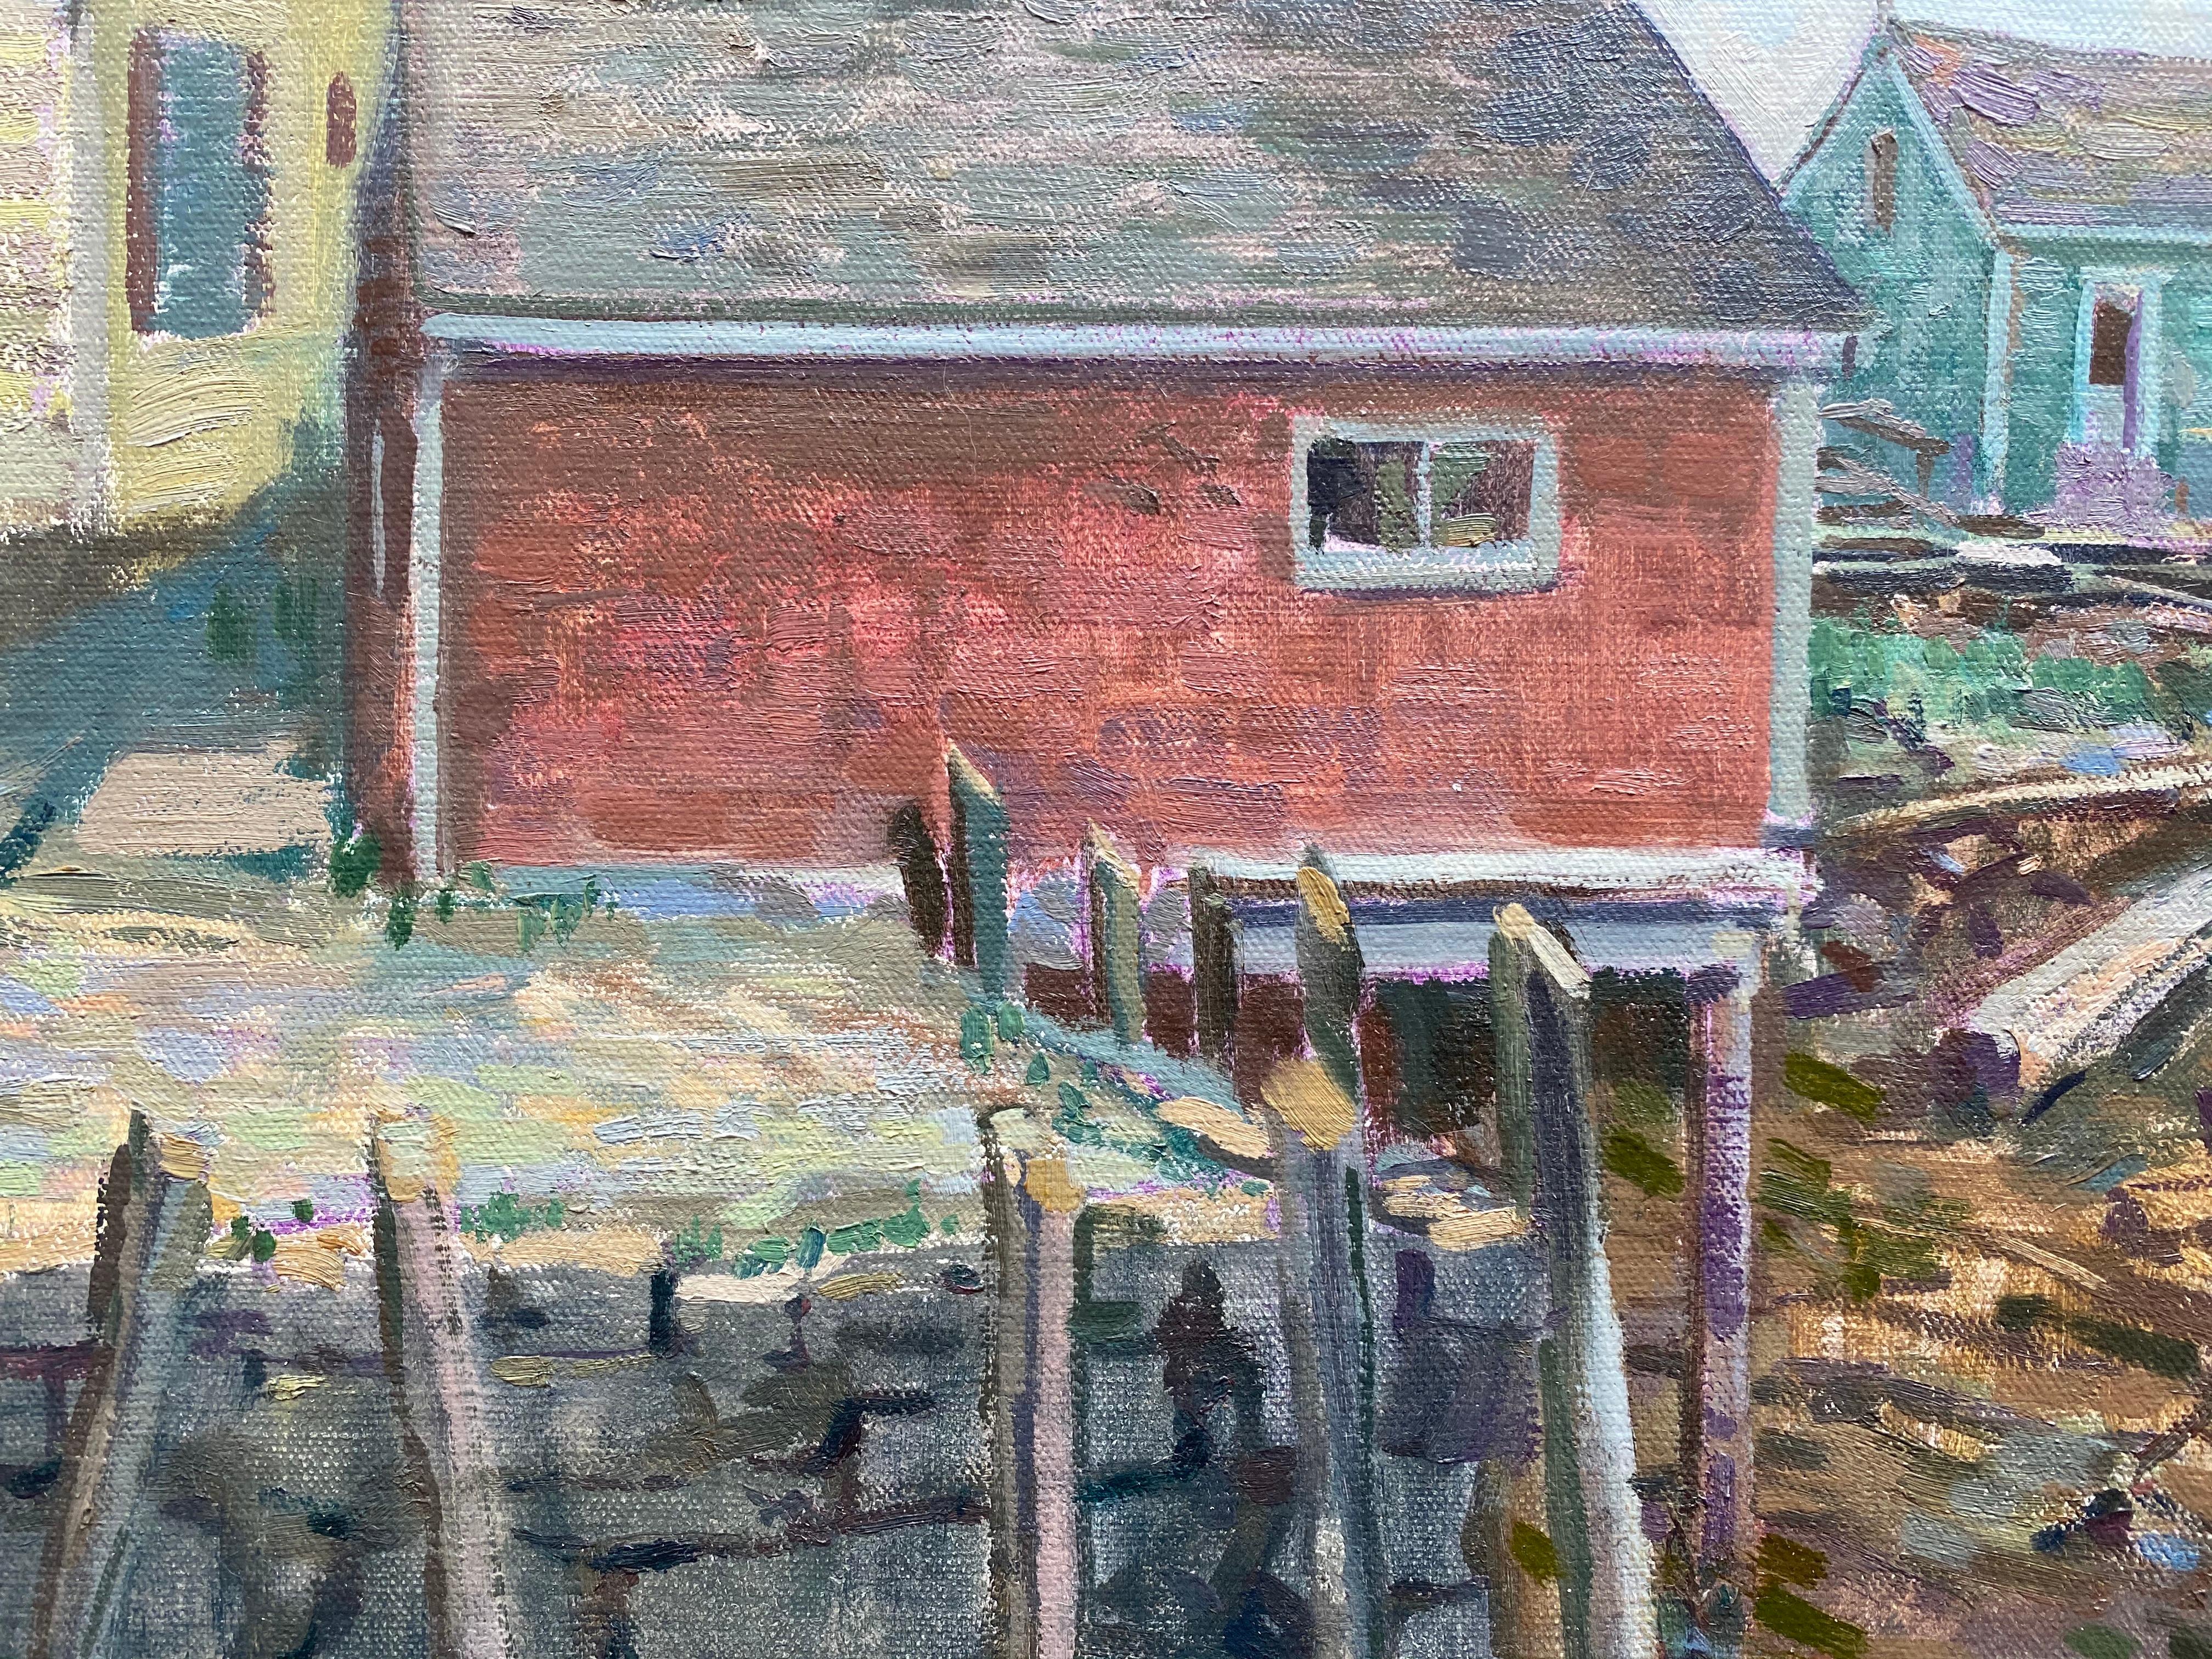 Painted en plein air, in the style of contemporary impressionism. Pastel colors make up a few structures along the shoreline of a harbor. Sticks and blocks stack-up to prop-up and protect the structures from the water. An old dock jutts out, into